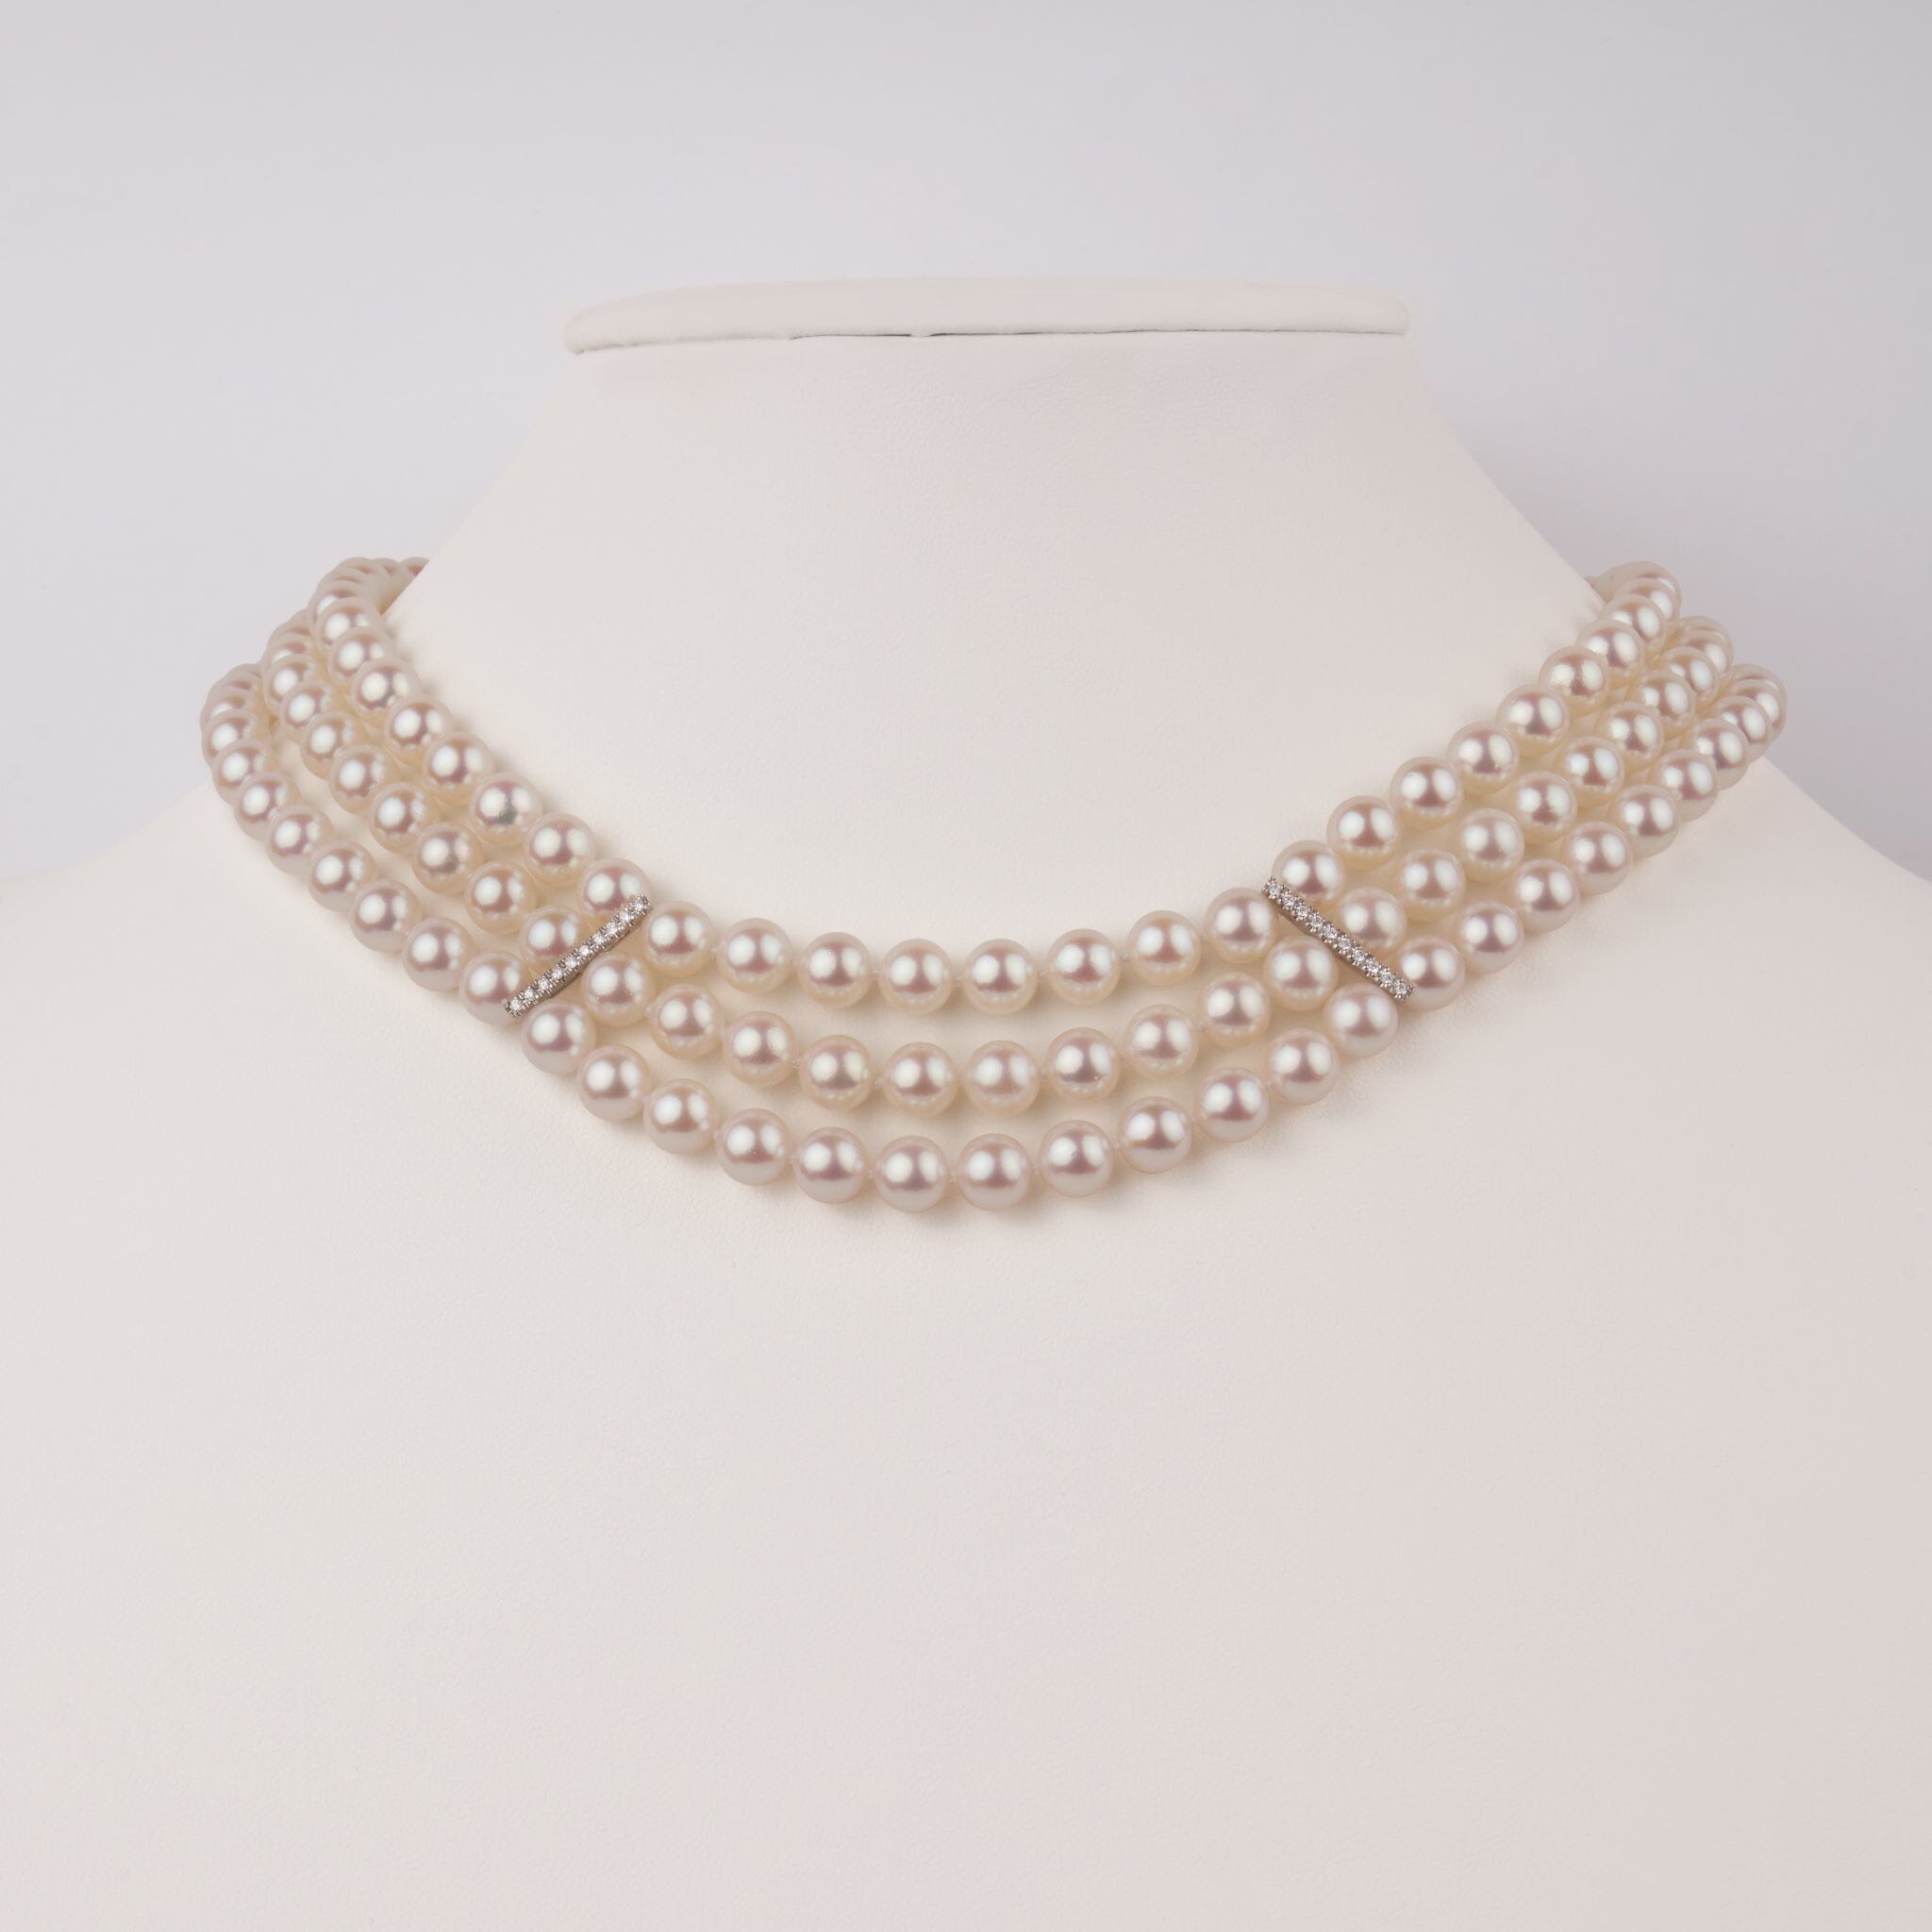 7.0-7.5 mm Triple Strand White Akoya AAA Pearl and Diamond Necklace